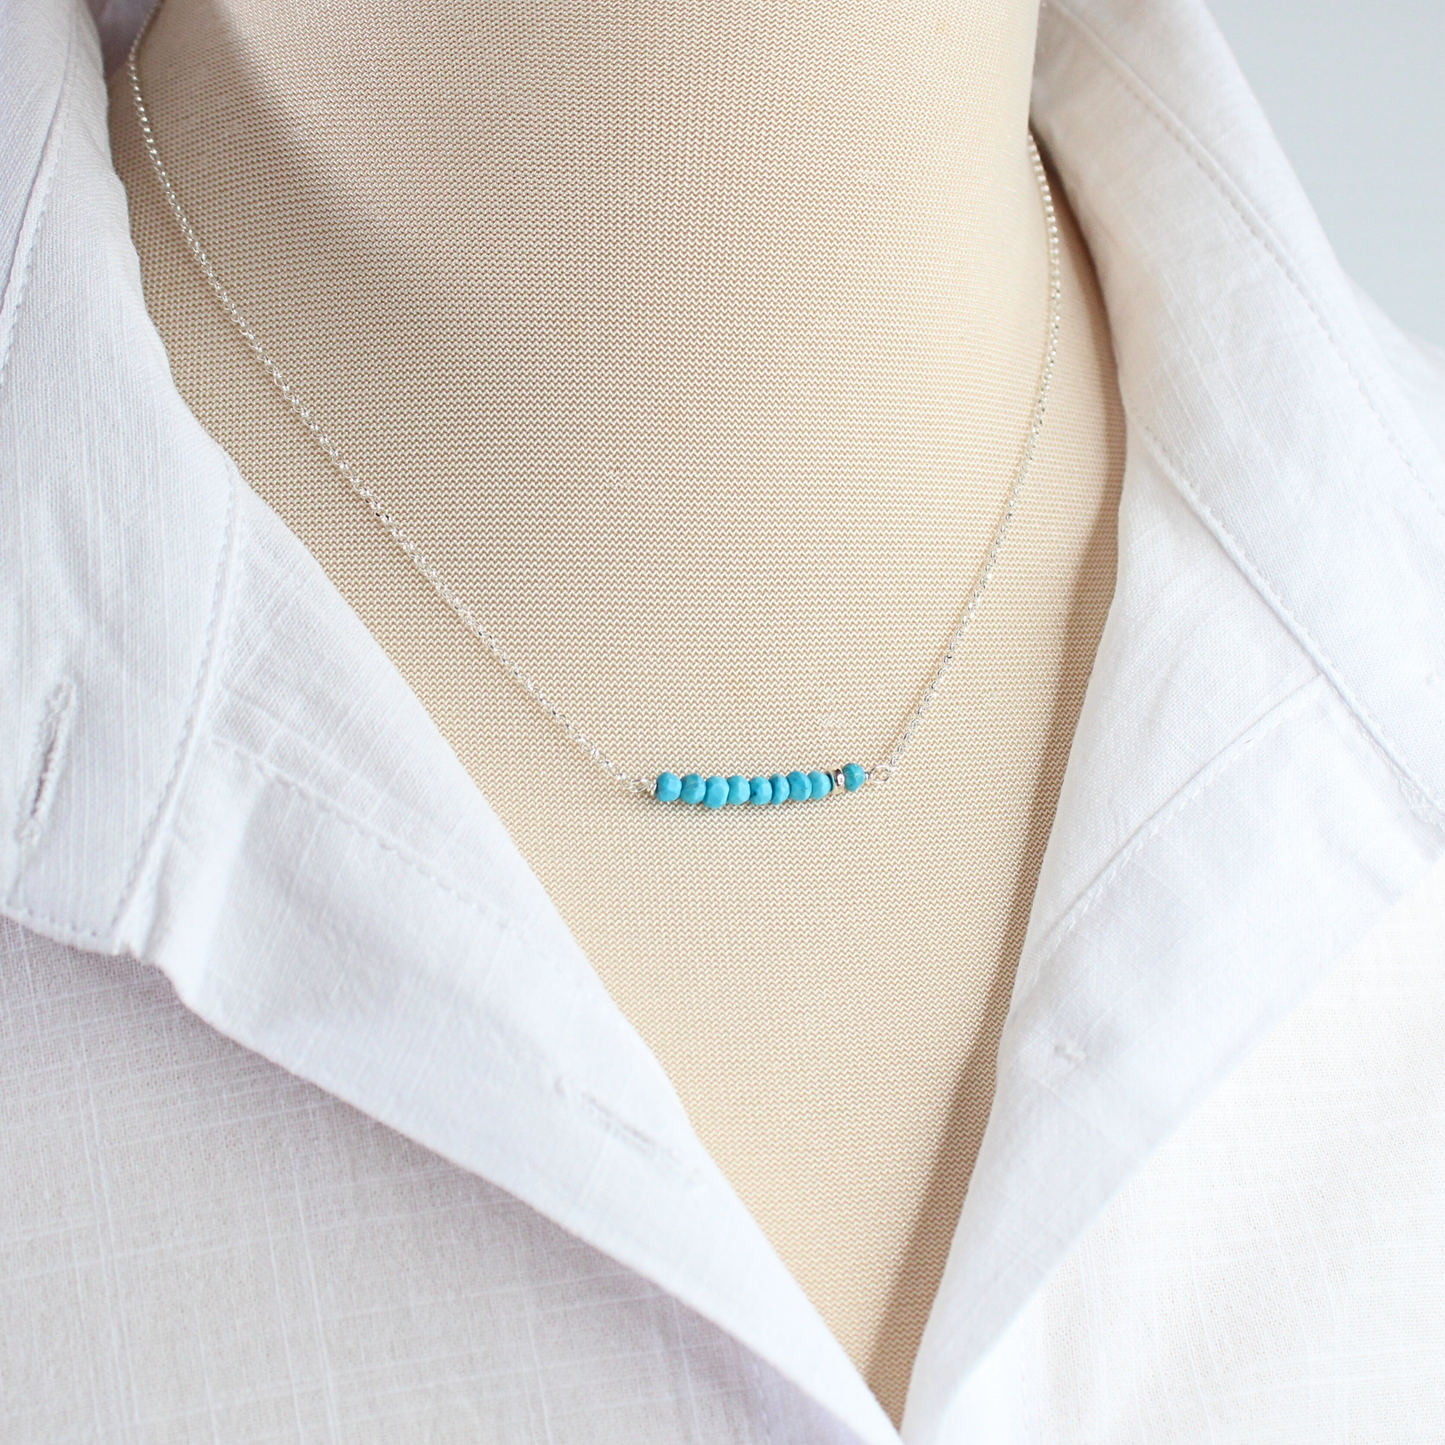 Turquoise Gemstone Bar Necklace Sterling Silver Limited Edition